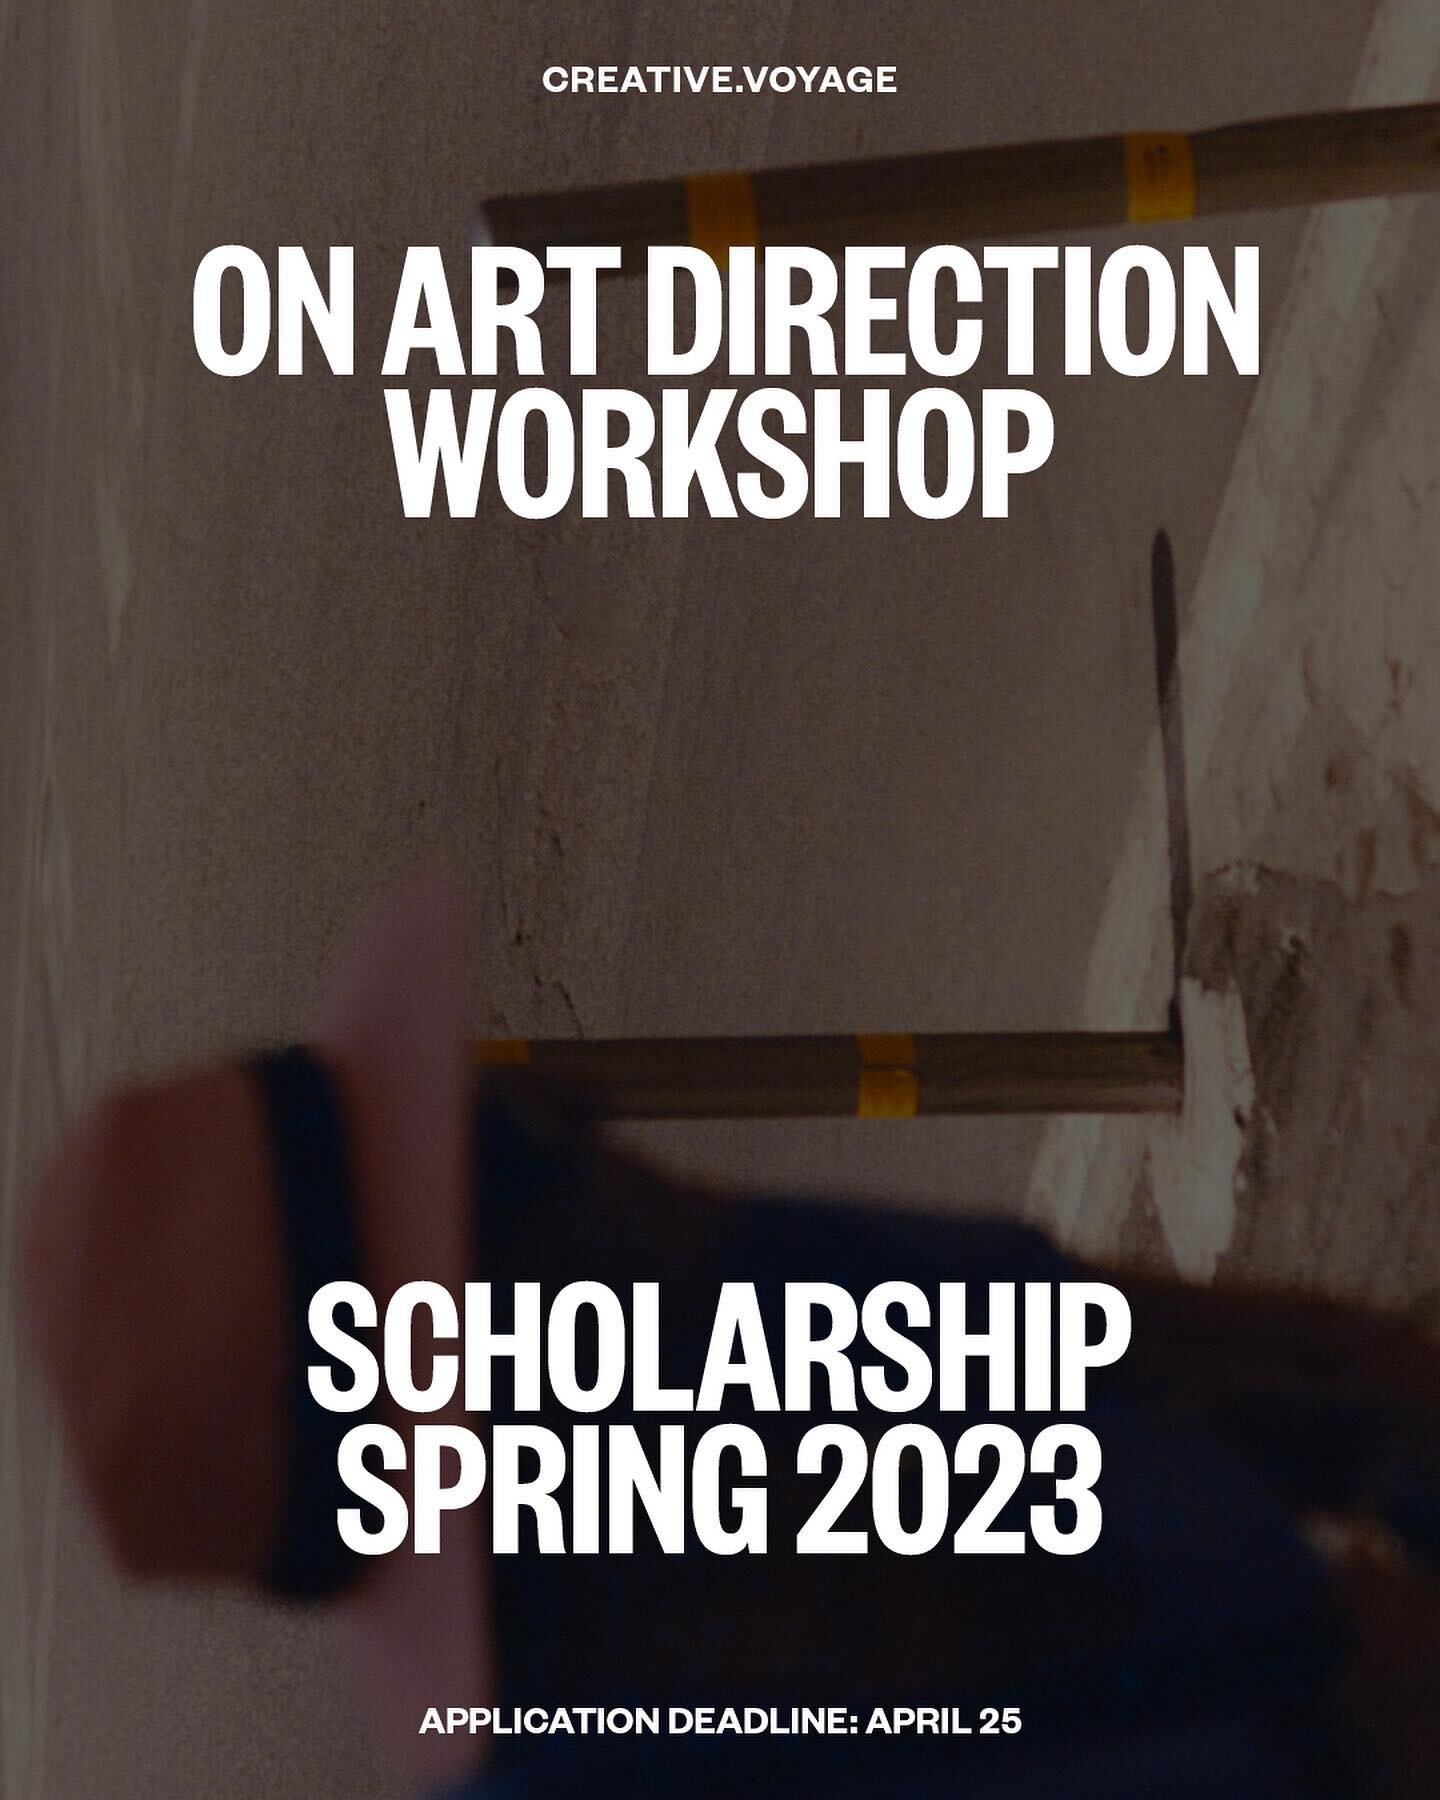 The deadline for the C.V Scholarship for On Art Direction Spring 2023 is today, April 25, 2023 (Tuesday, Midnight PST). Apply via link in the bio or share with fellow creatives who would be good candidates 🙏